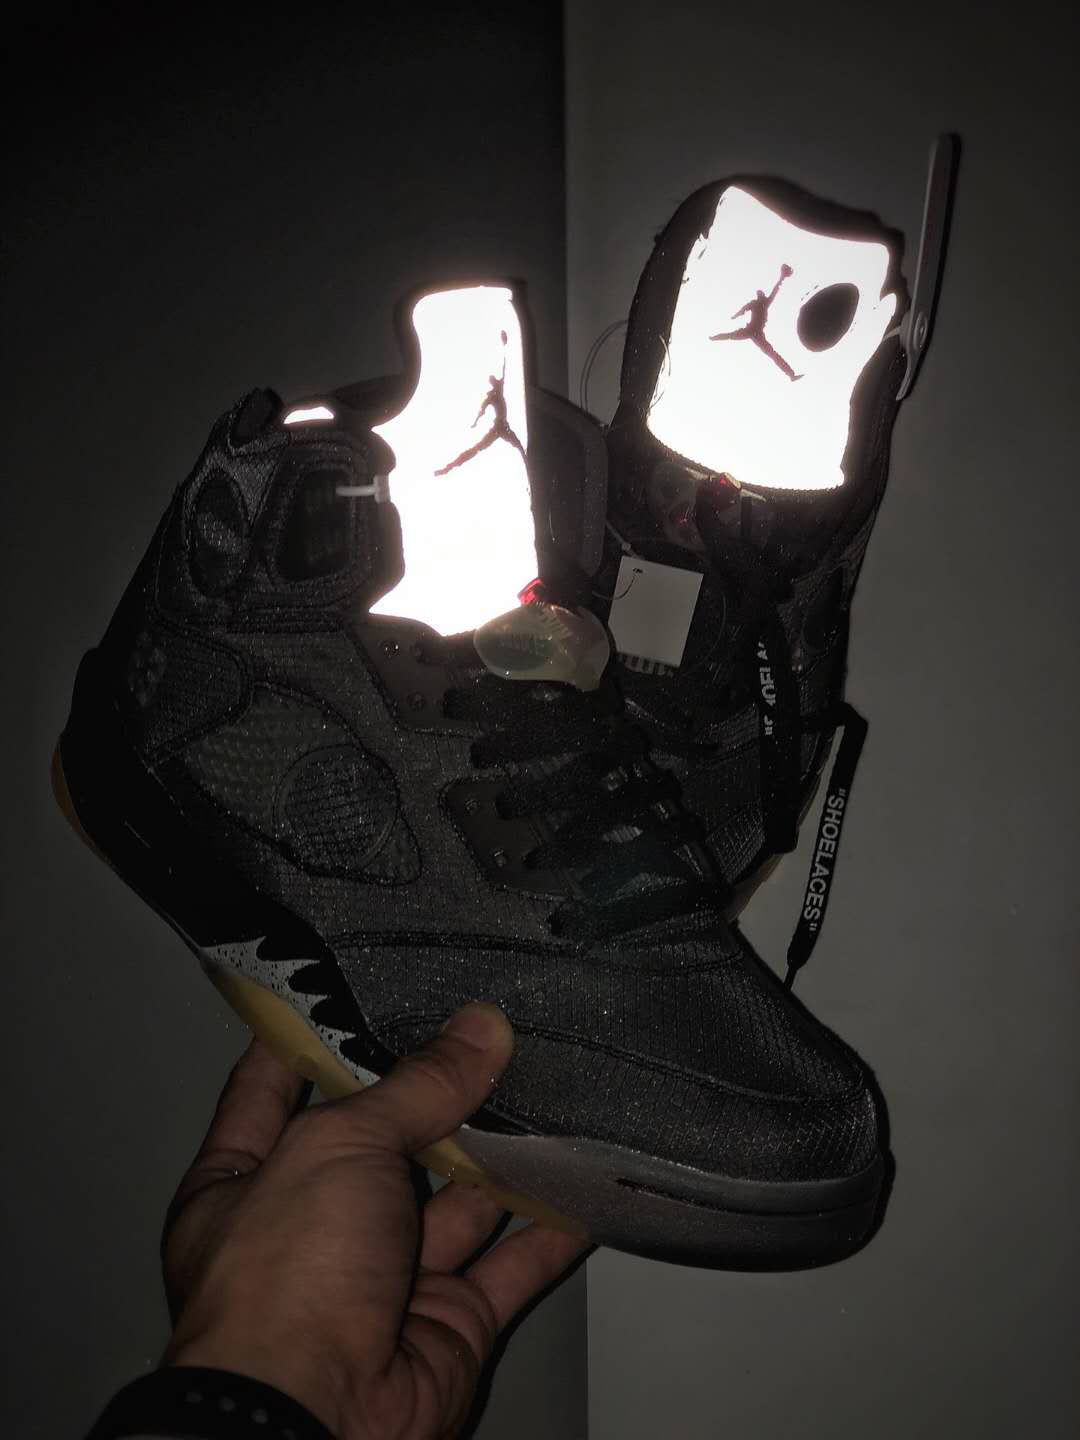 Off-White x Air Jordan 5 Retro SP 'Muslin' CT8480-001: Stylish Collaboration Celebrating Iconic Sneaker (80 characters)